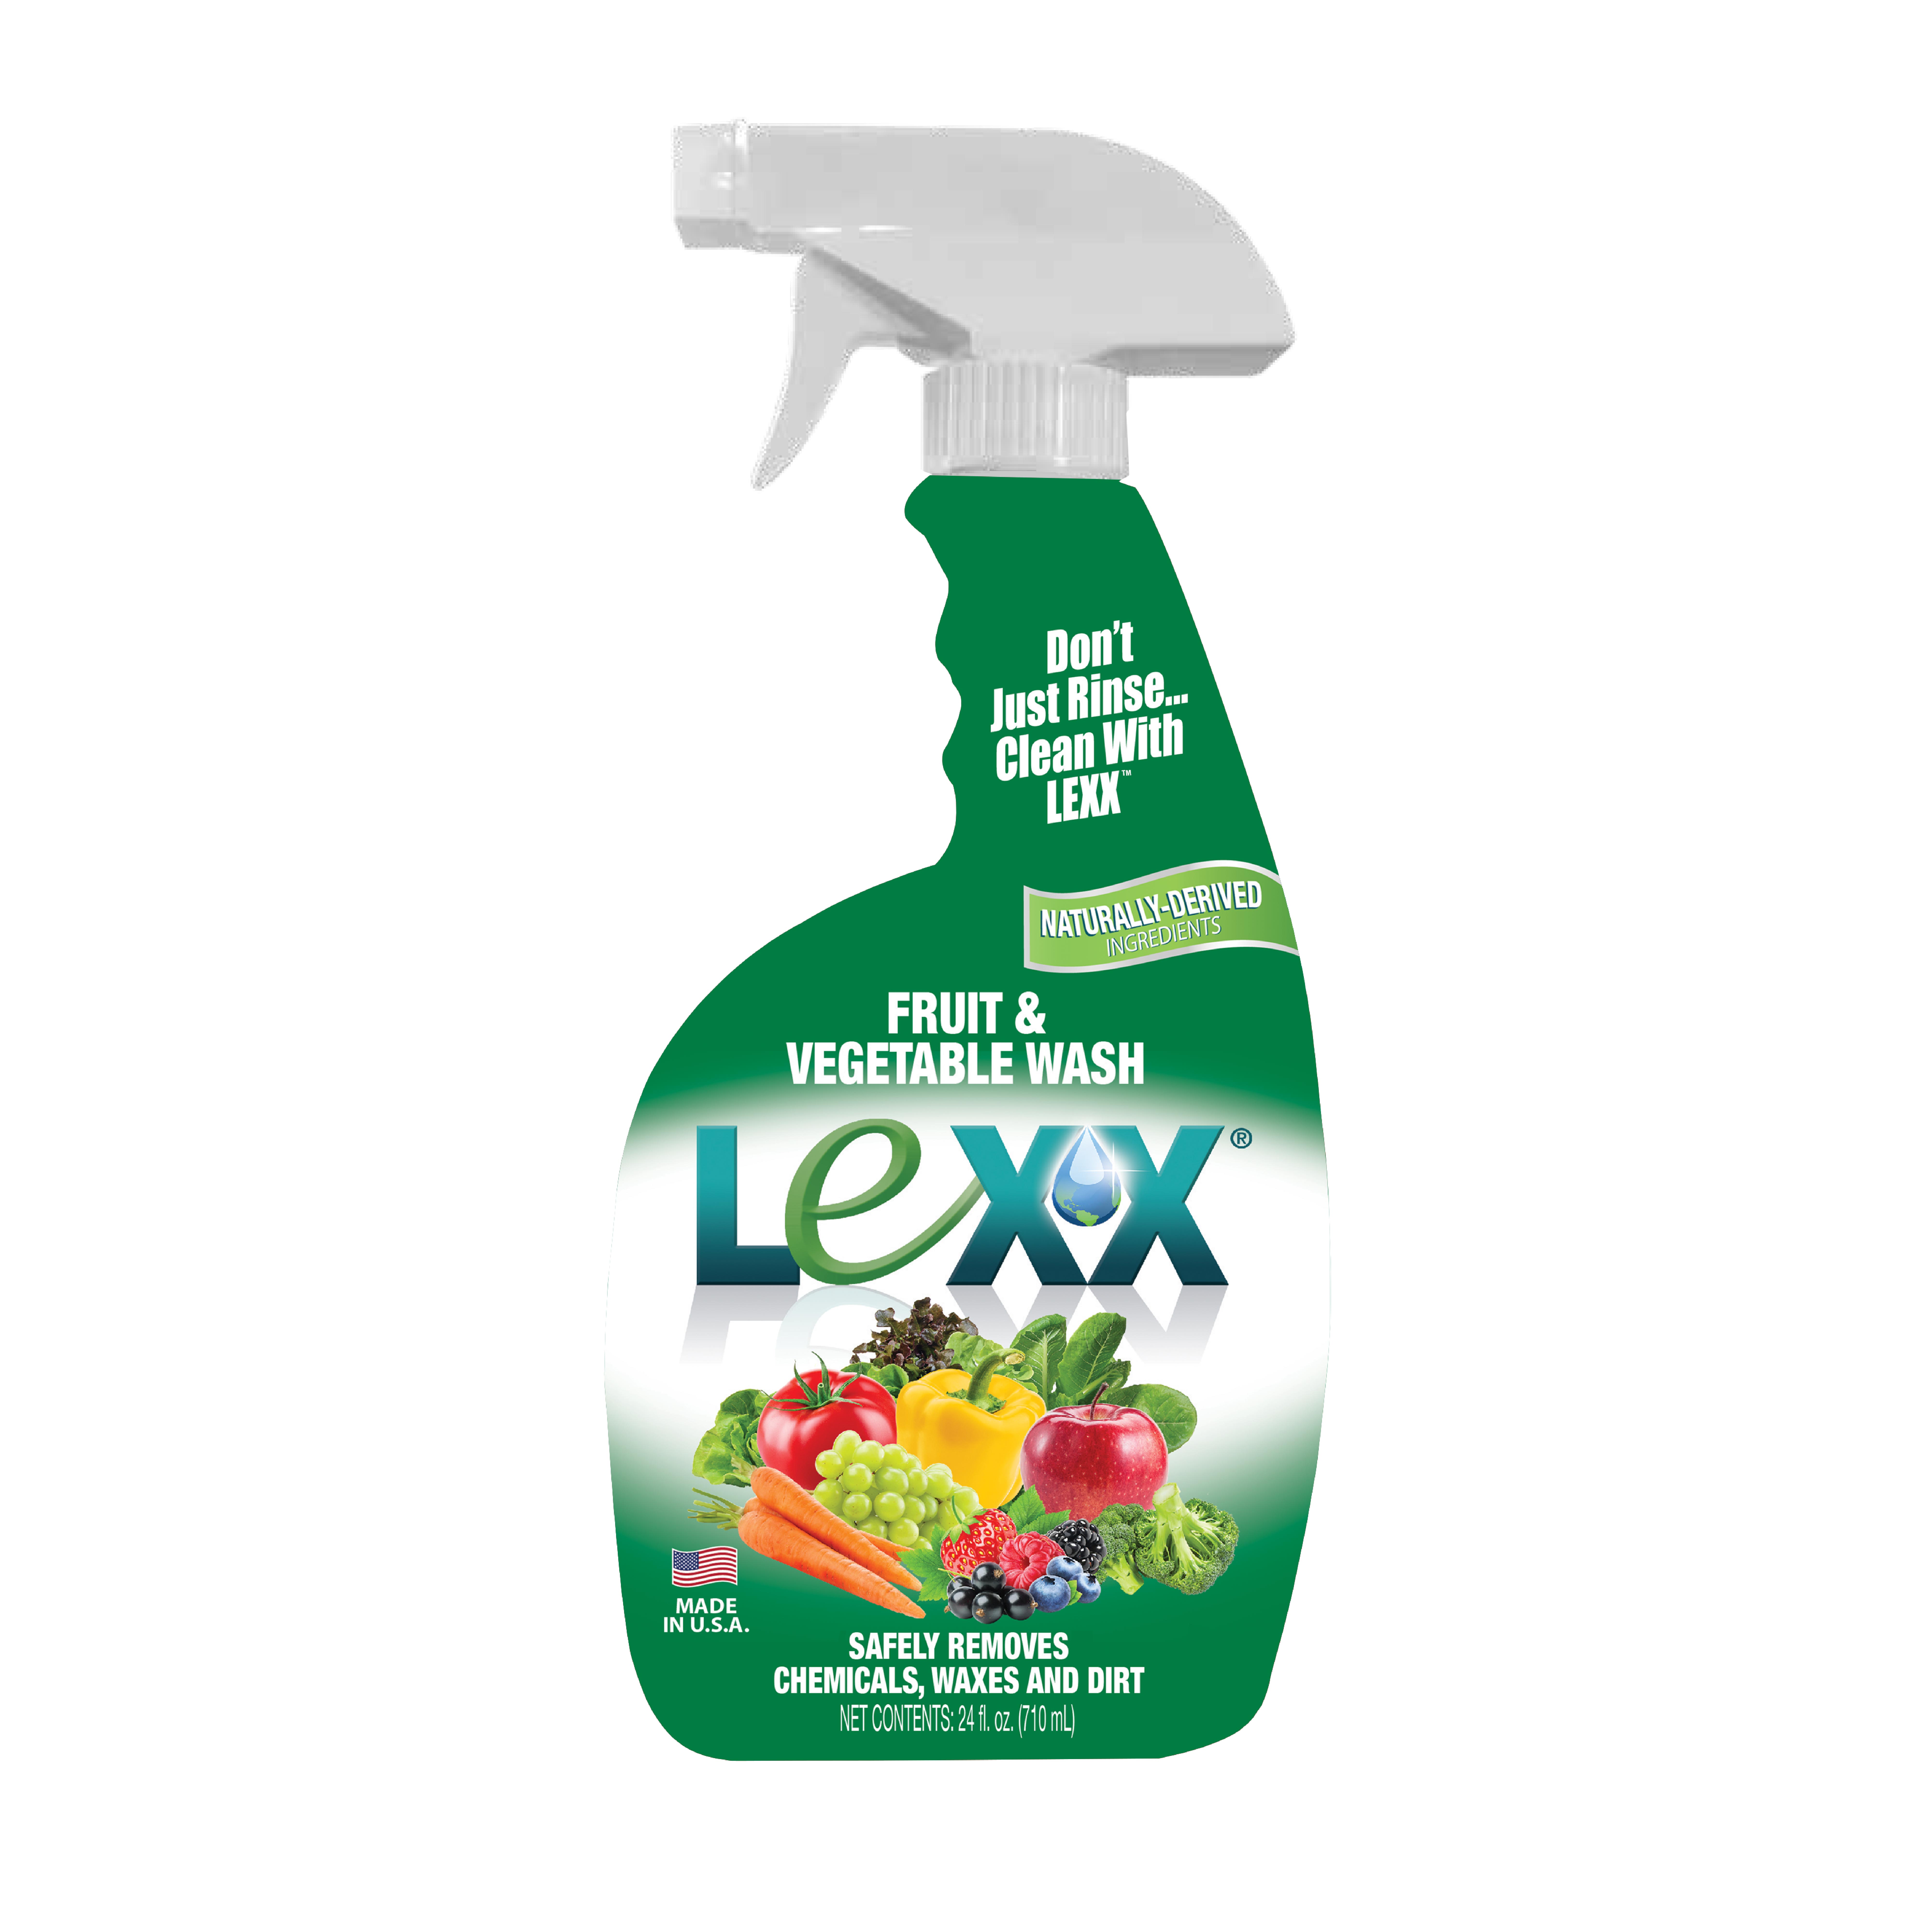 LEXX Fruit and vegetable wash